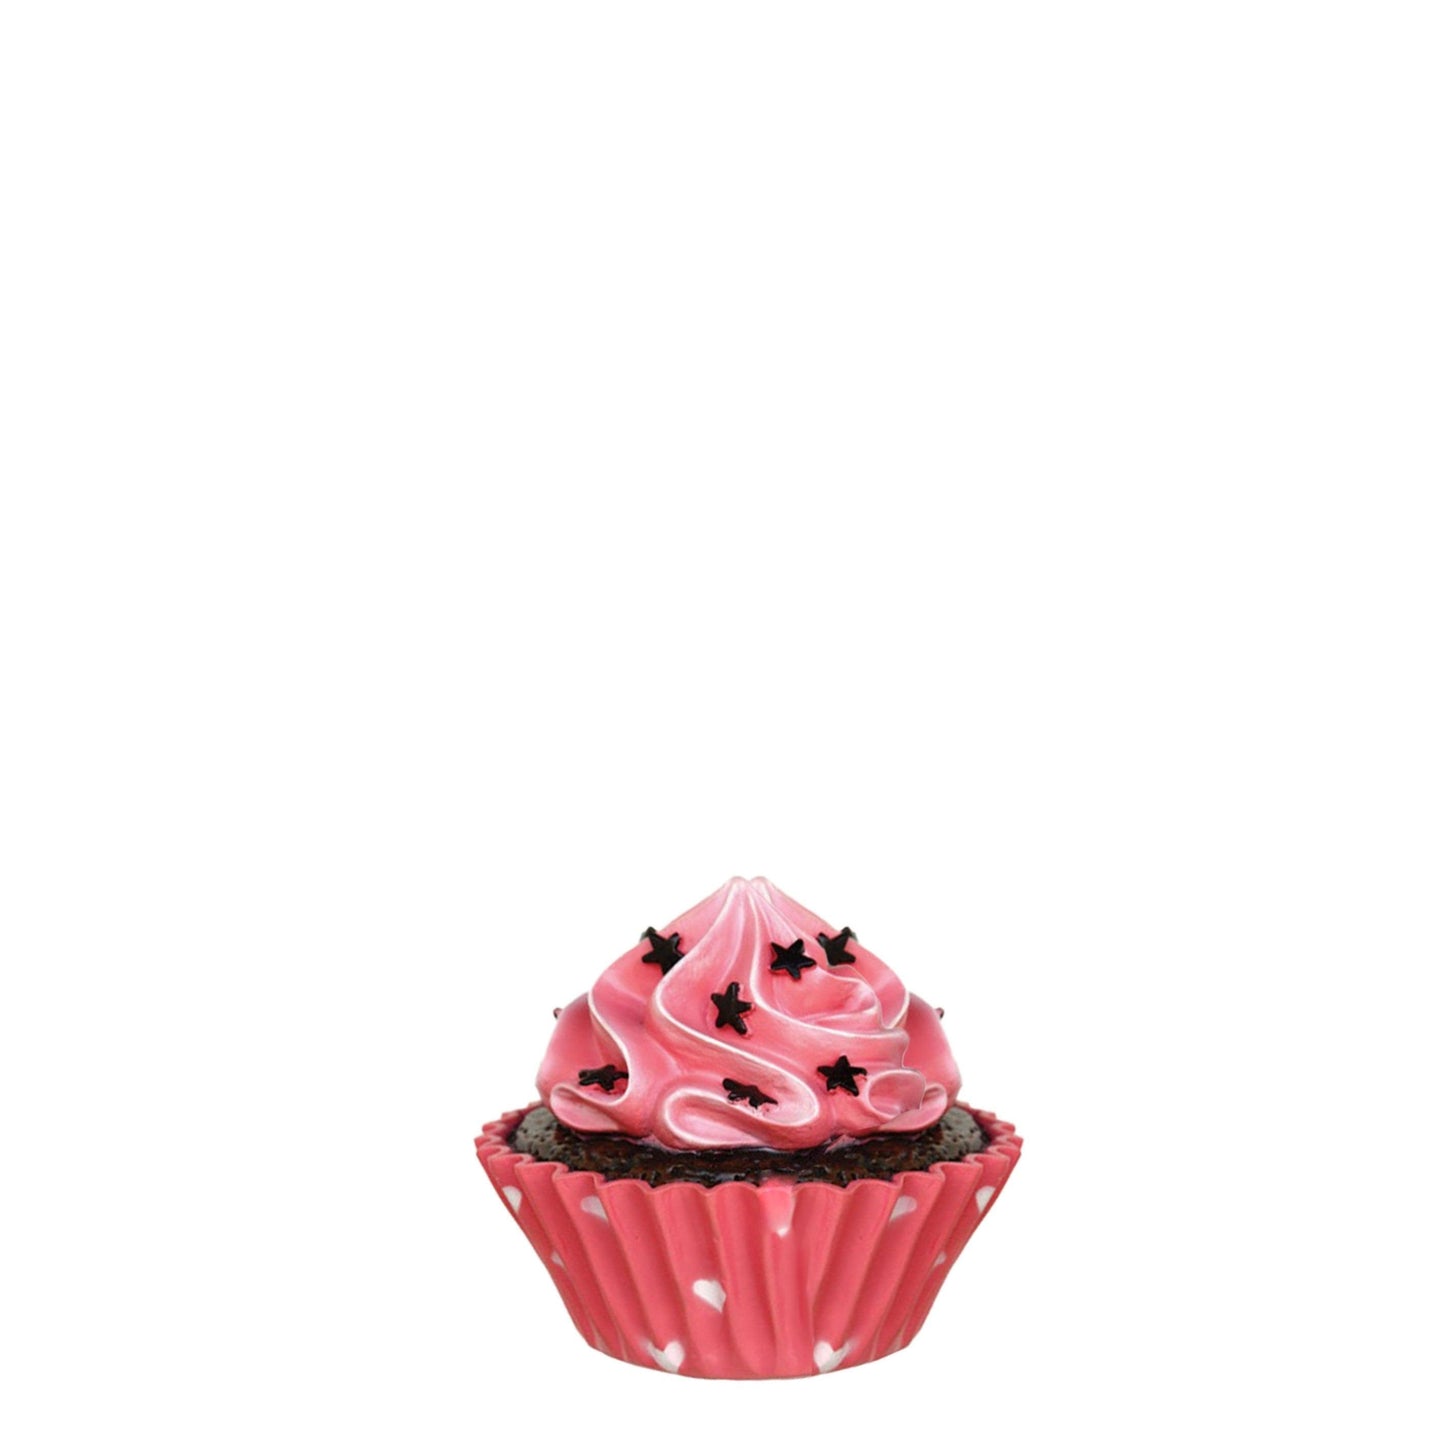 Small Pink Cupcake Statue With Stars - LM Treasures Prop Rentals 